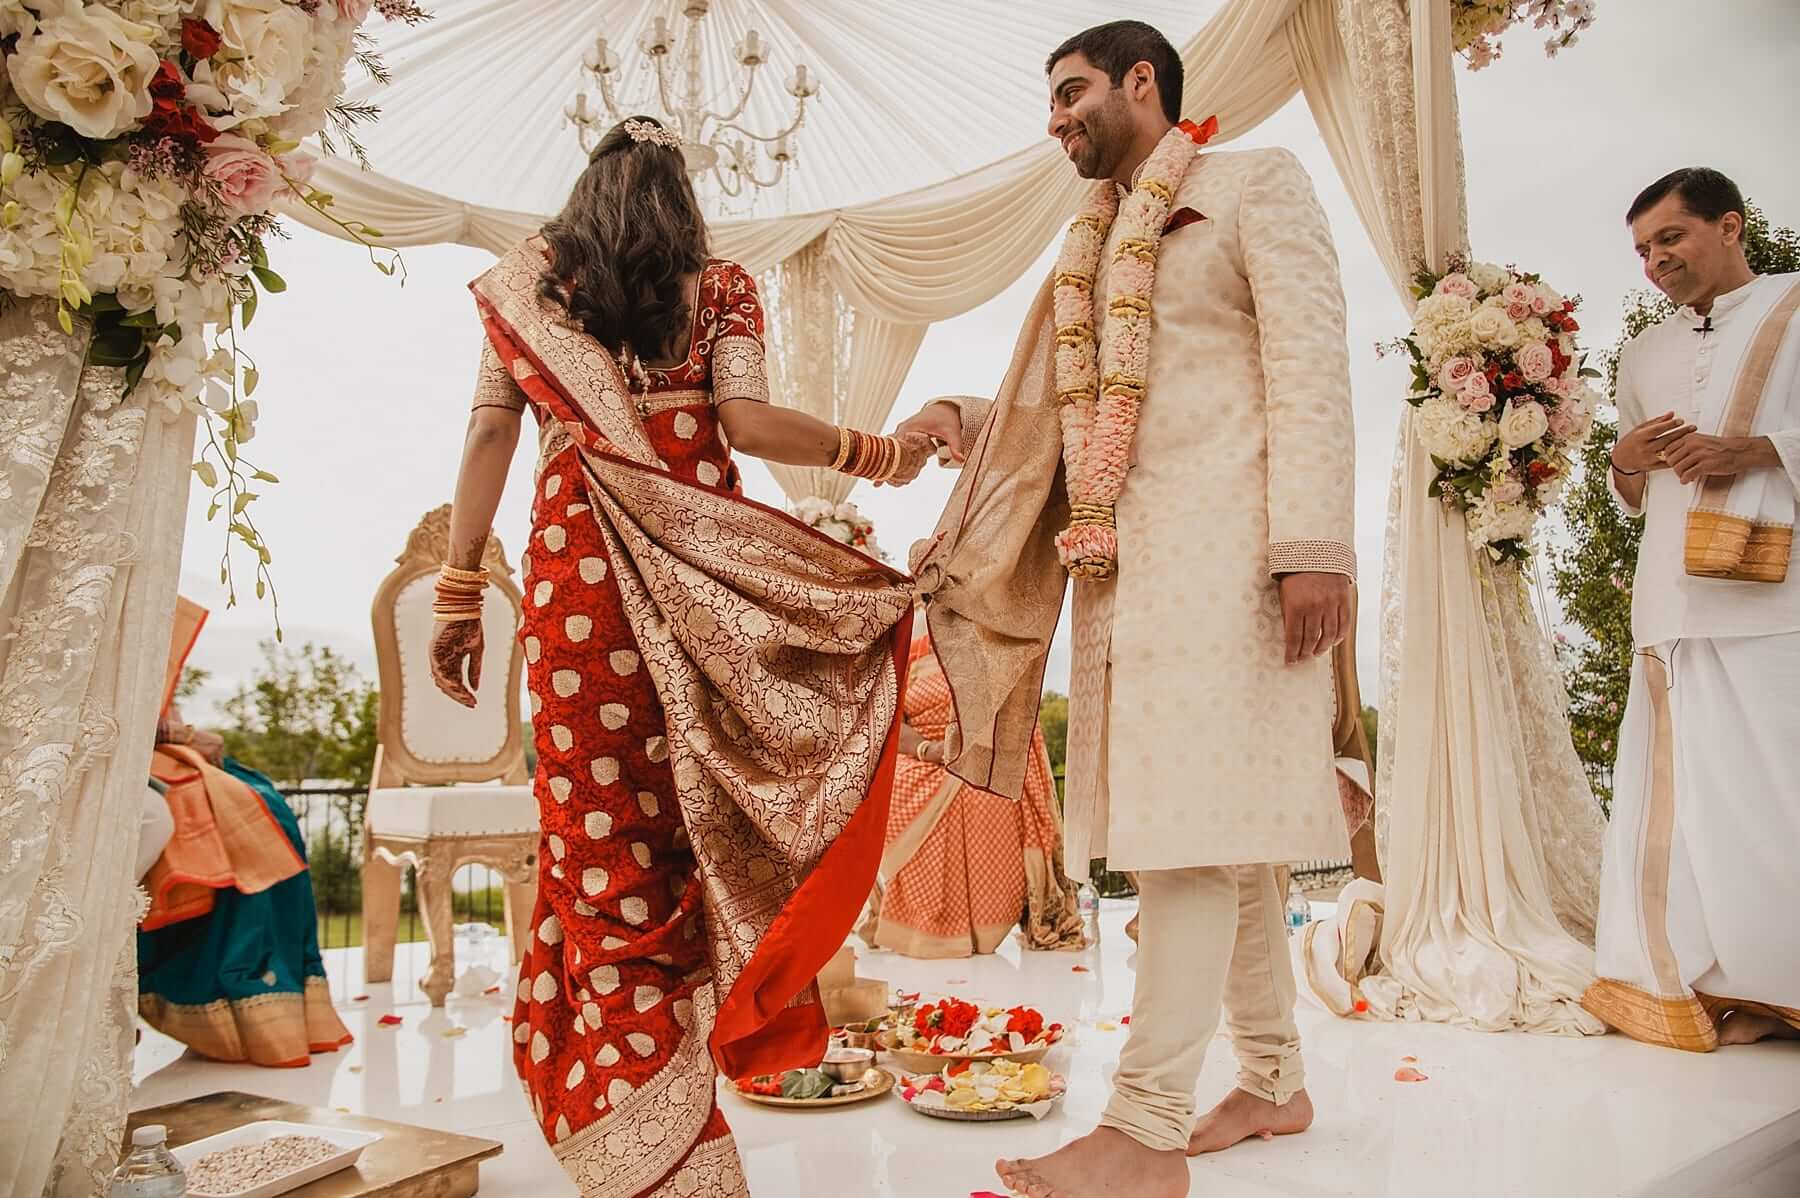 An Indian wedding experience with a bride and groom.